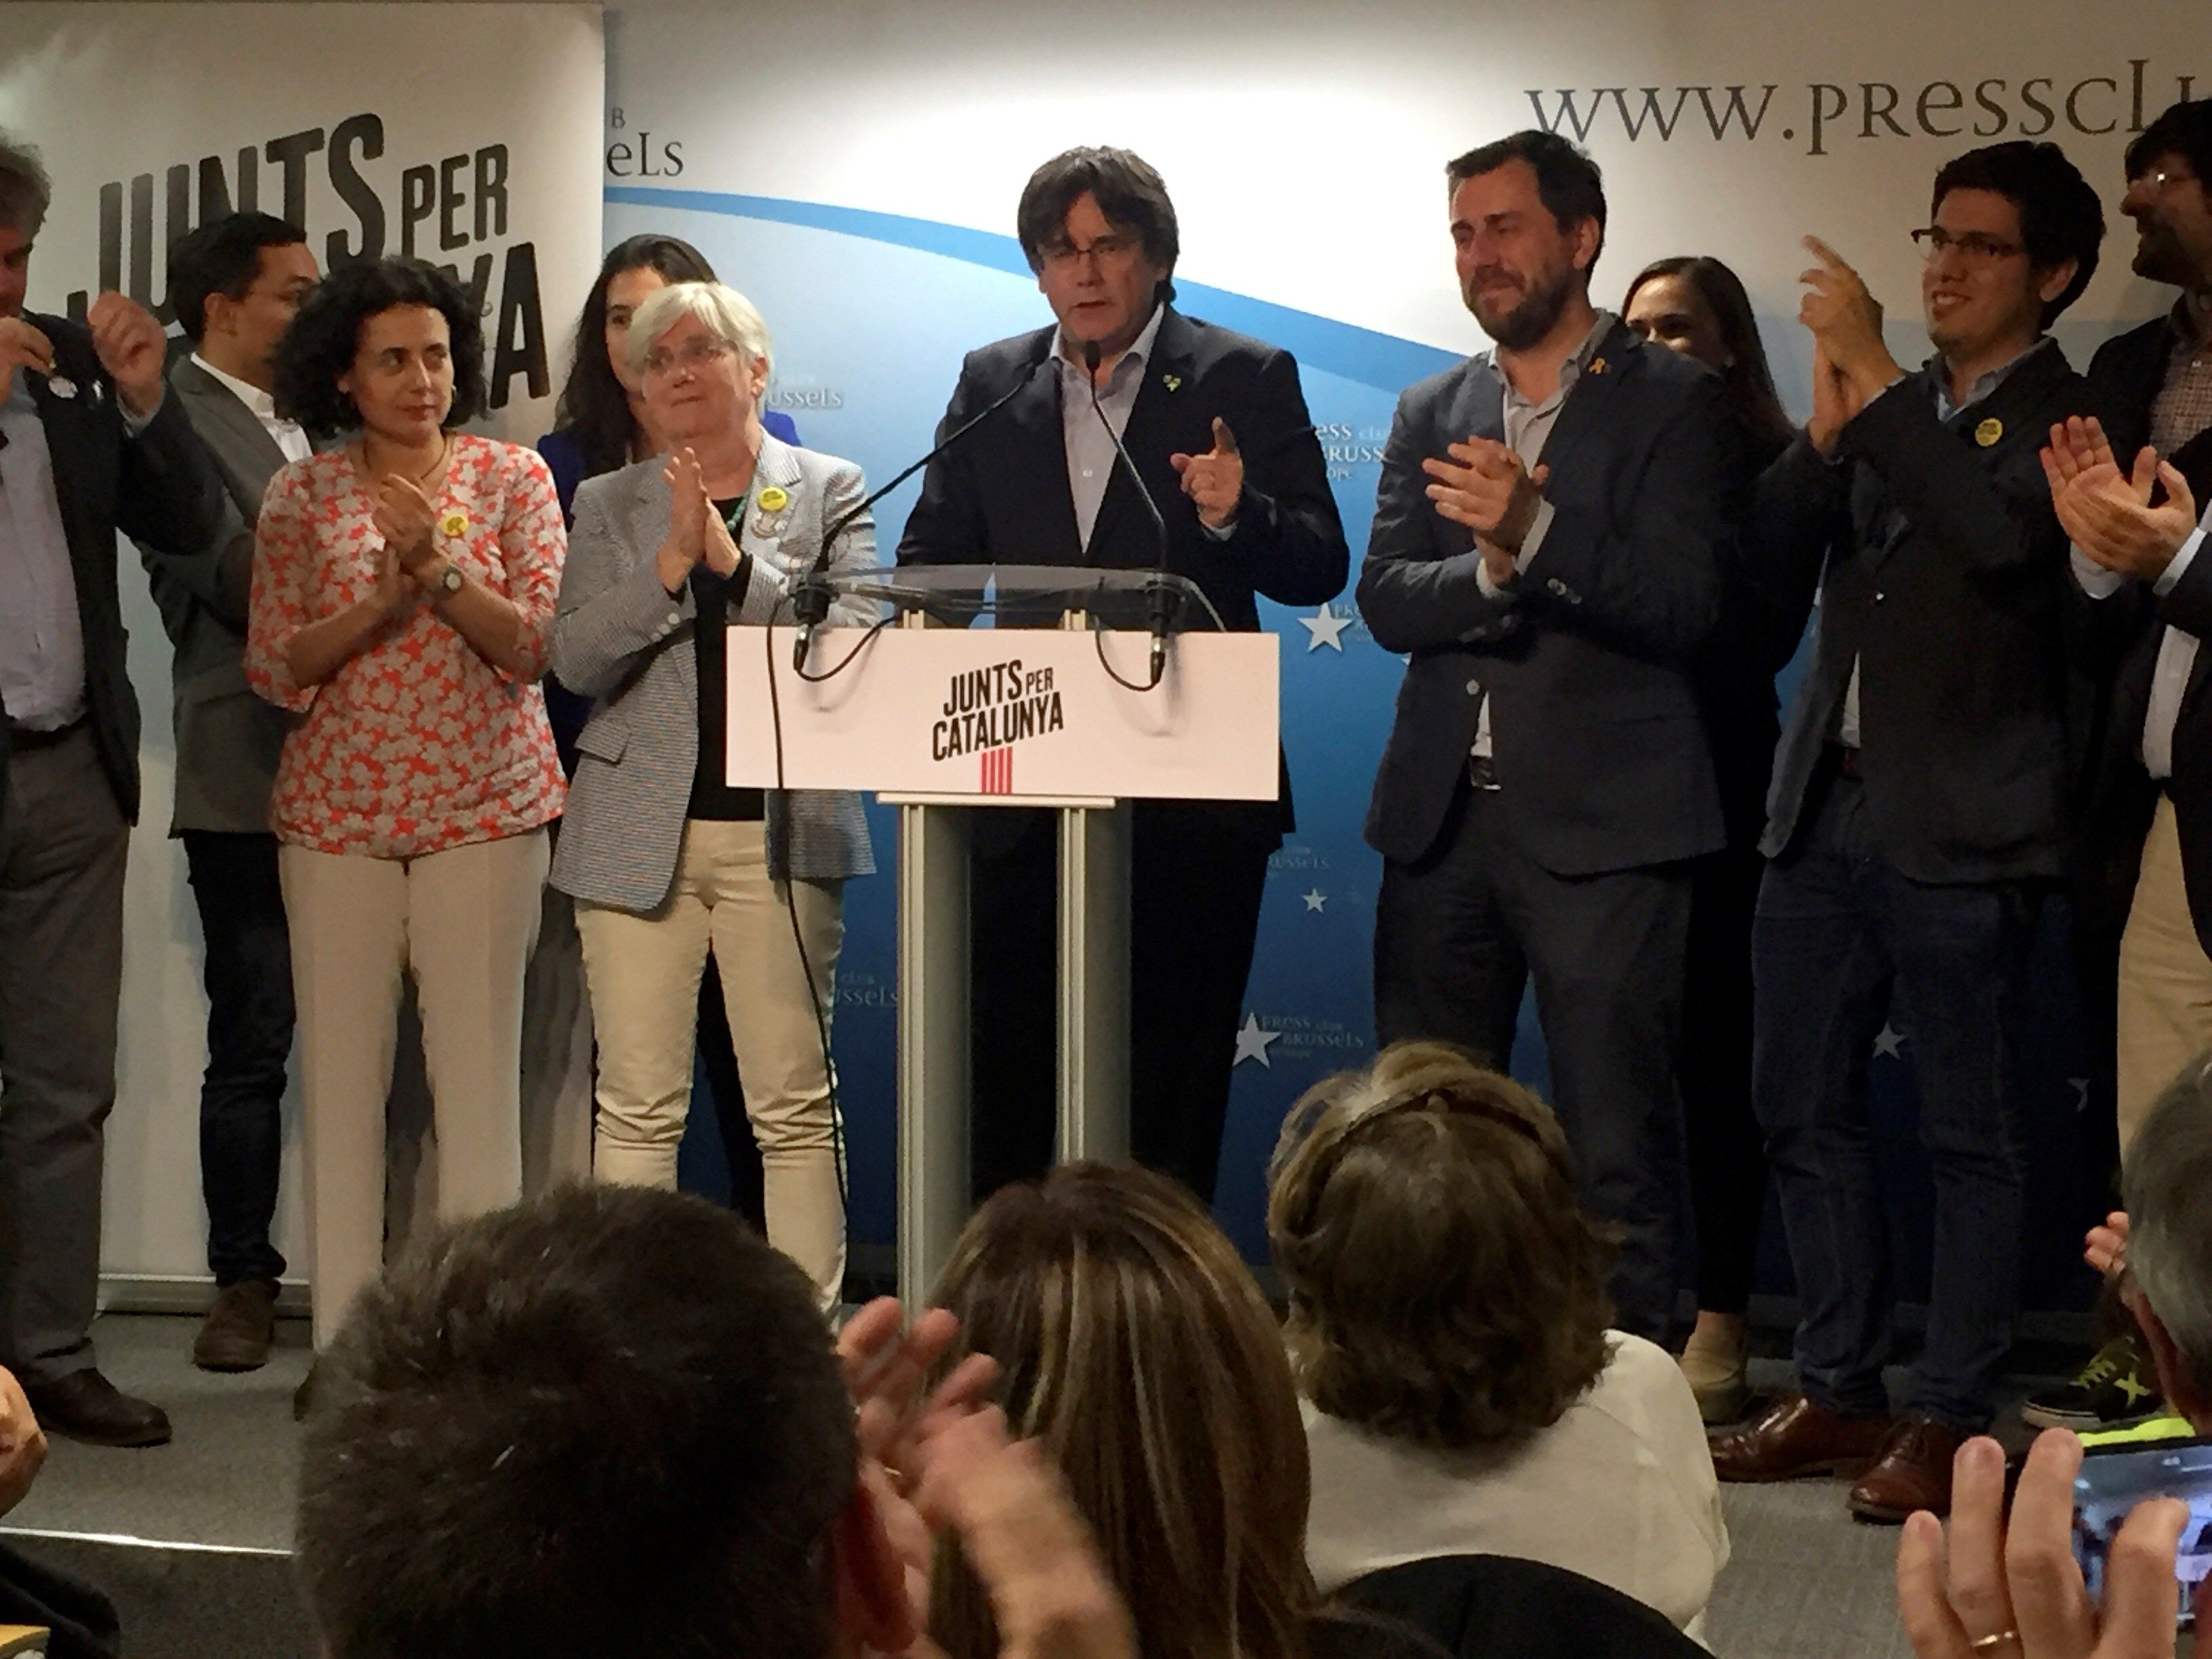 Puigdemont and Maragall lead a pro-independence victory in Catalonia and Barcelona